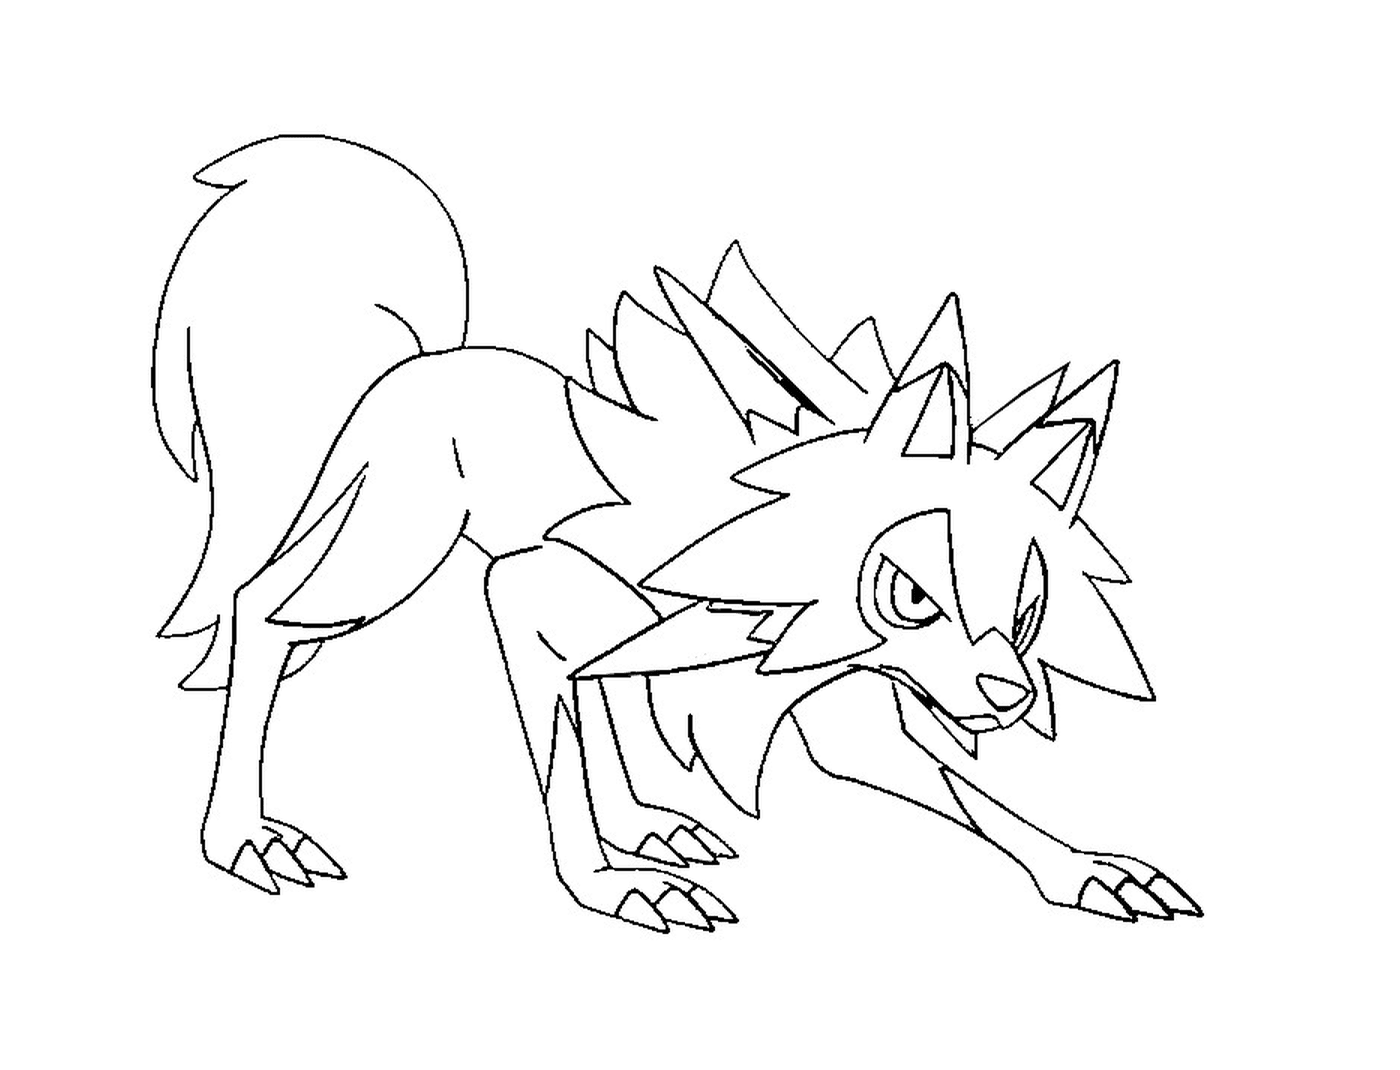  Lougaroc day form, a wolf with pointed tail 